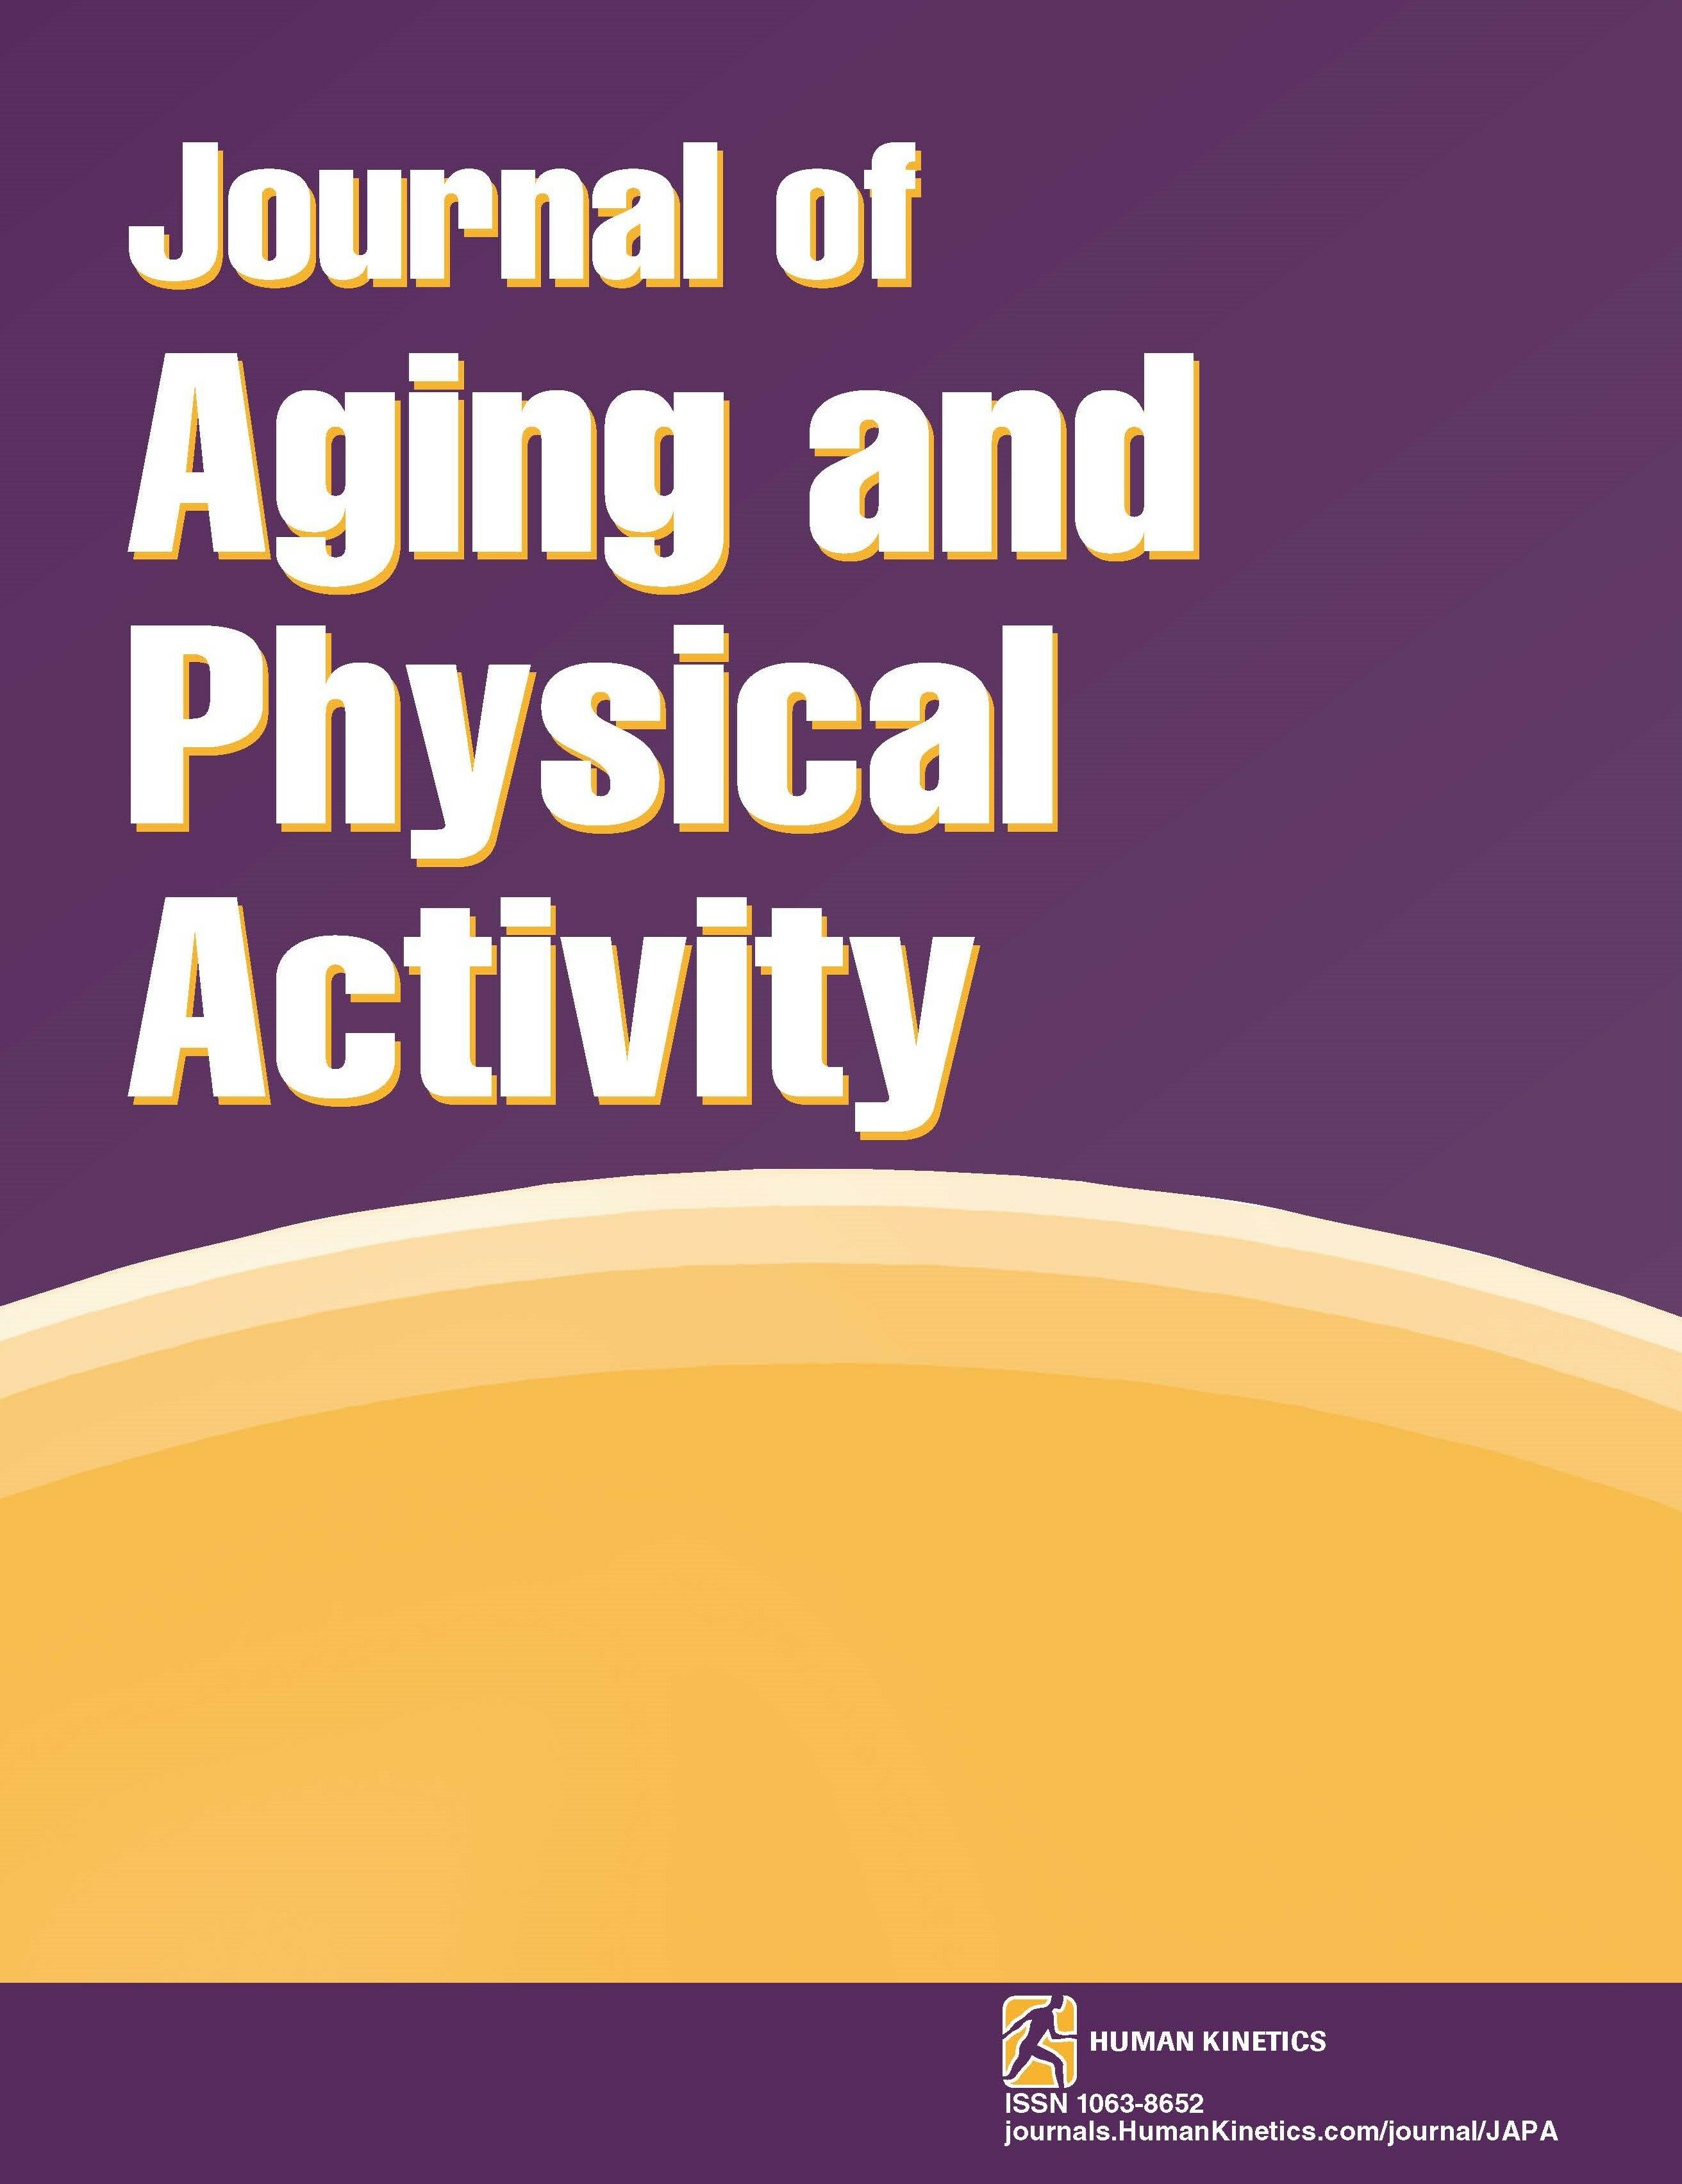 Is Walk Score Associated With Physical Activity and Screen Time in Brazilian Older Adults?